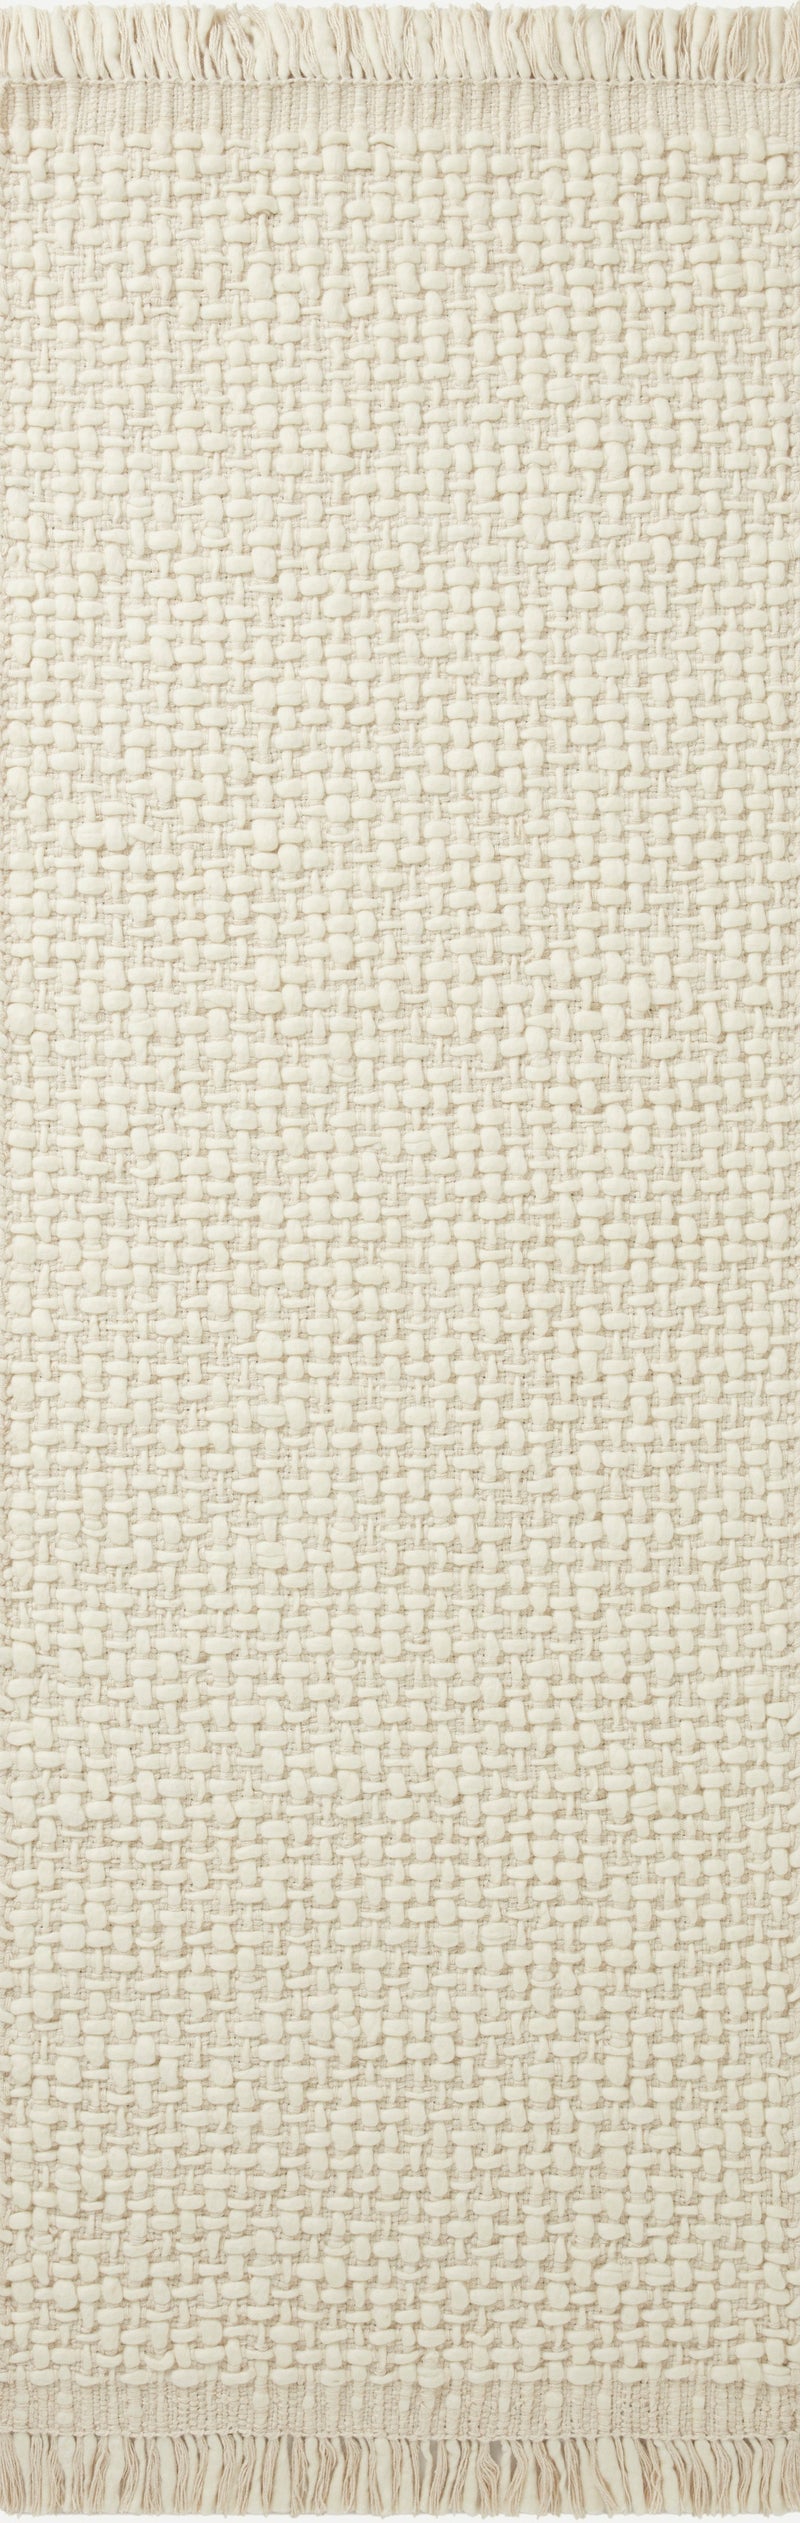 media image for yellowstone hand woven ivory ivory rug by amber lewis x loloi yeloyel 01ivivb6f0 2 213